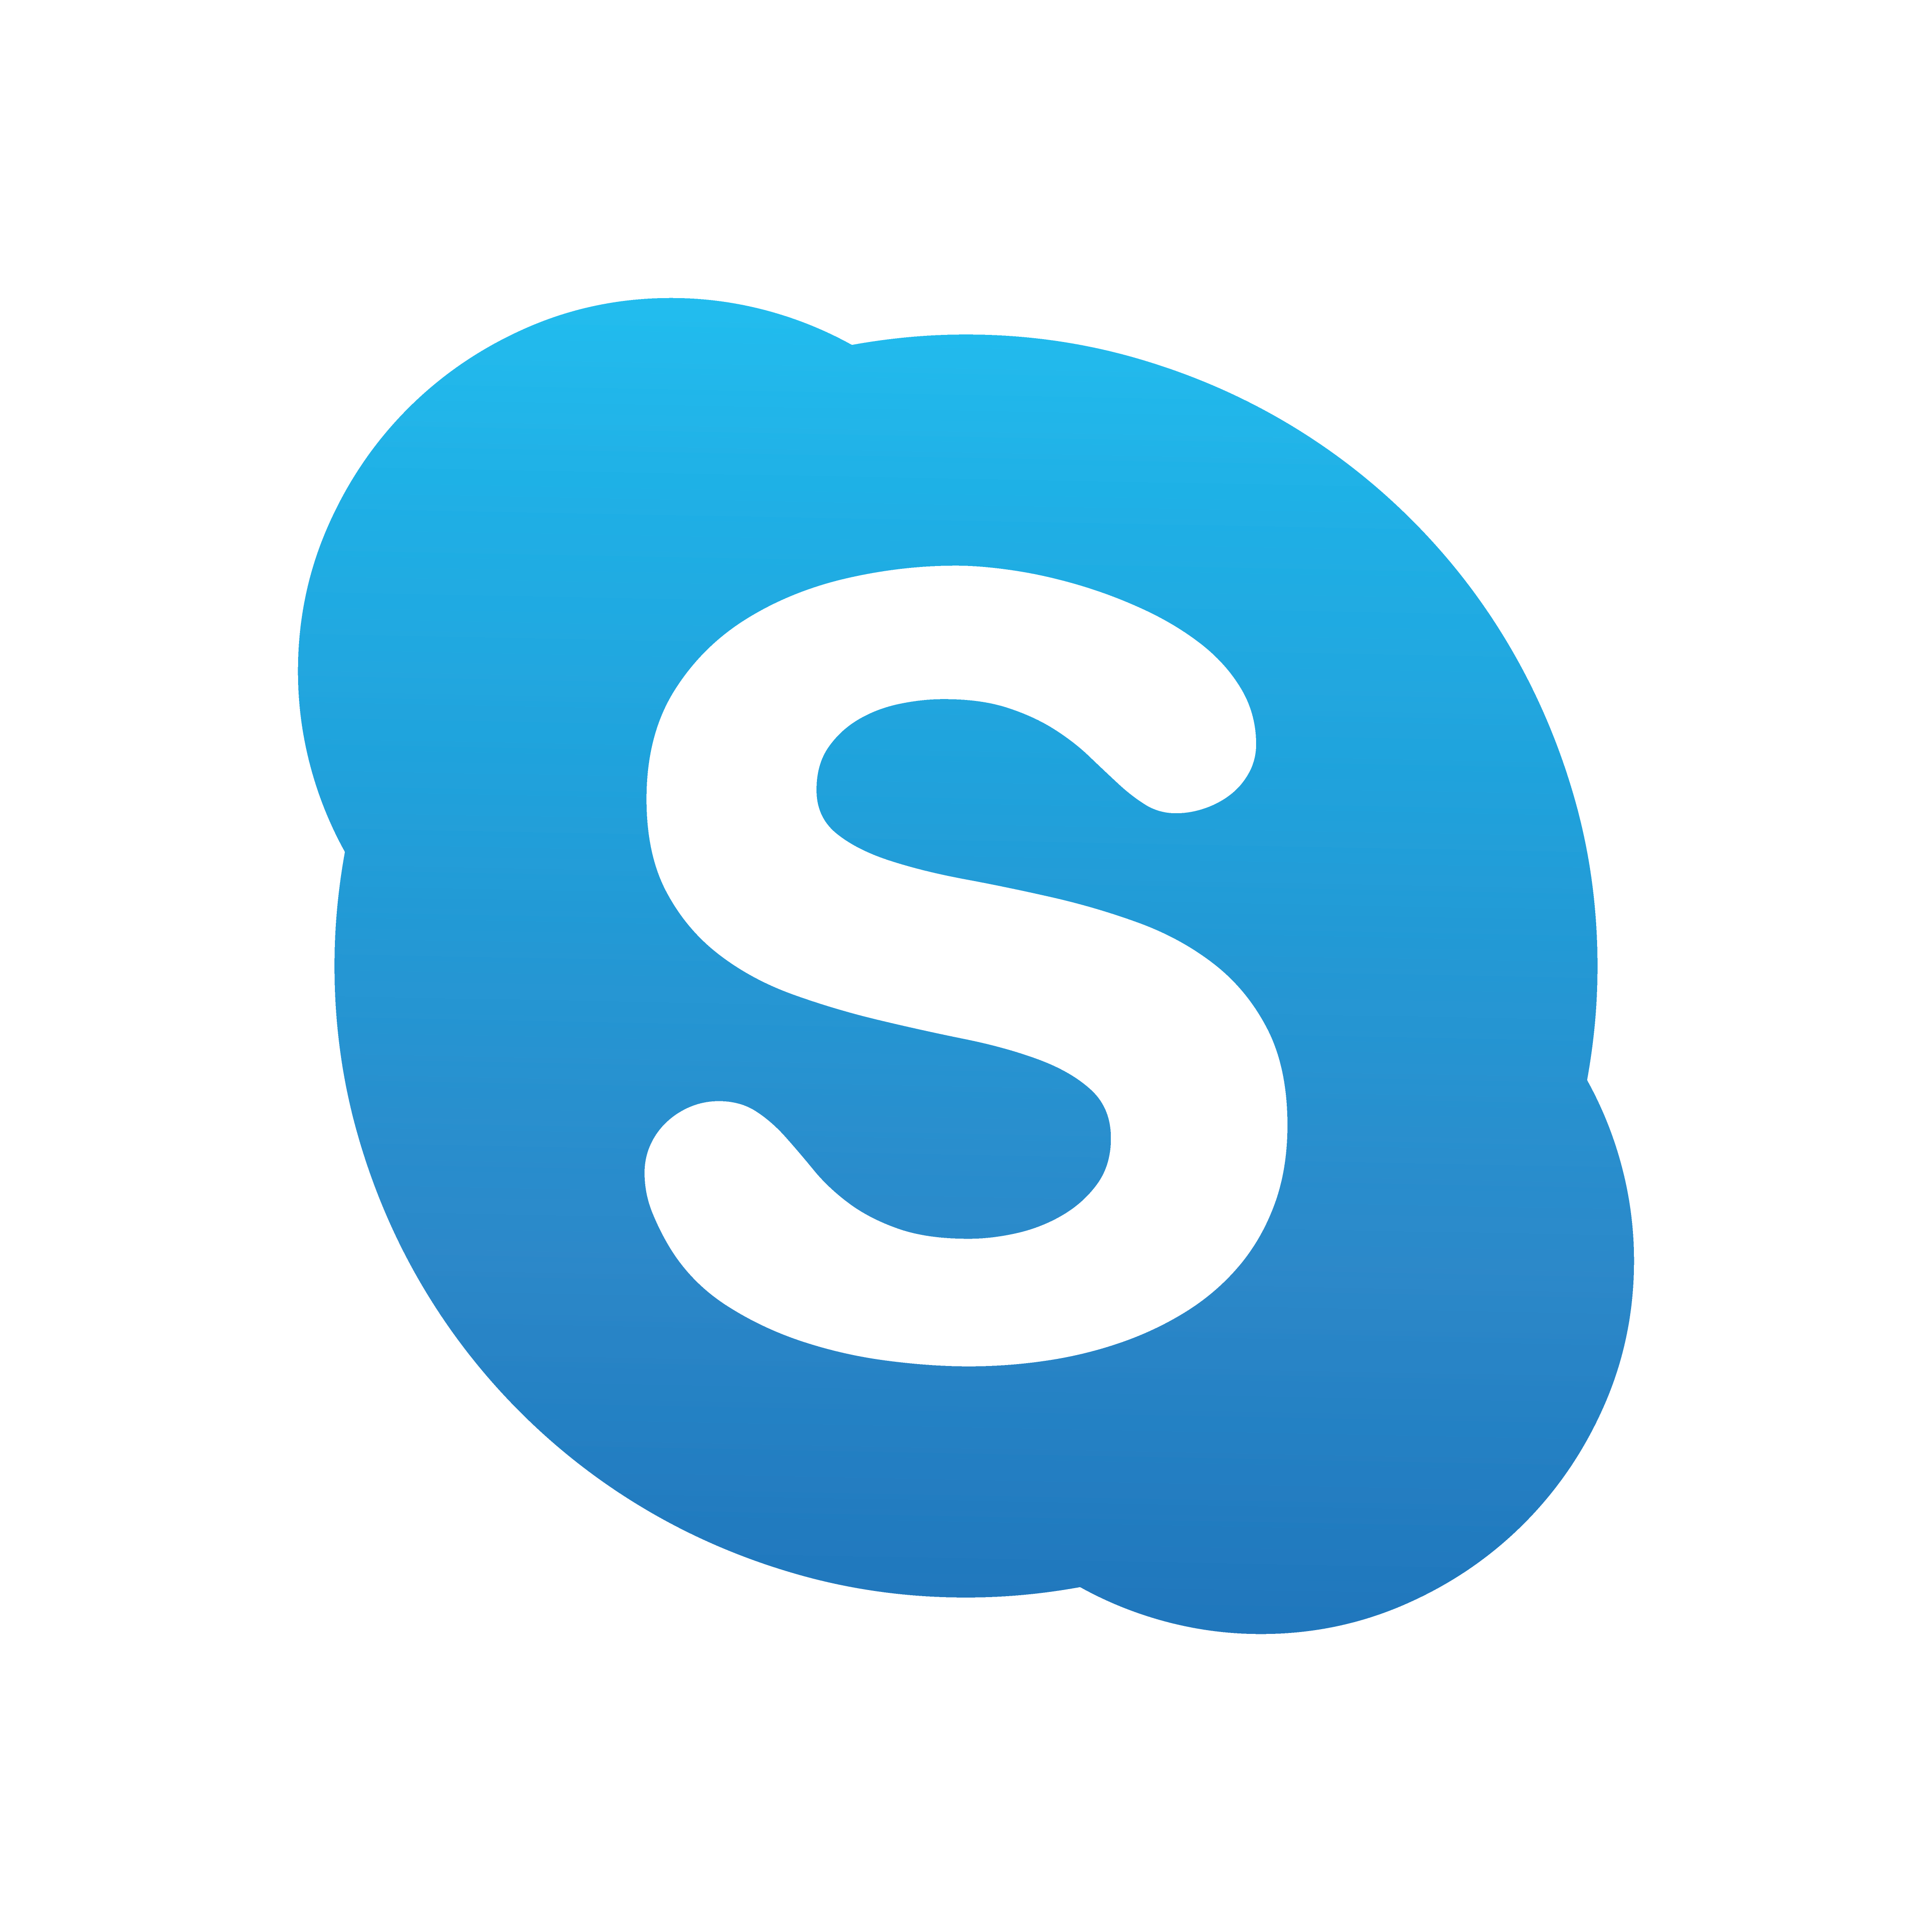 Skype Logo   Png And Vector   Logo Download - Skype, Transparent background PNG HD thumbnail